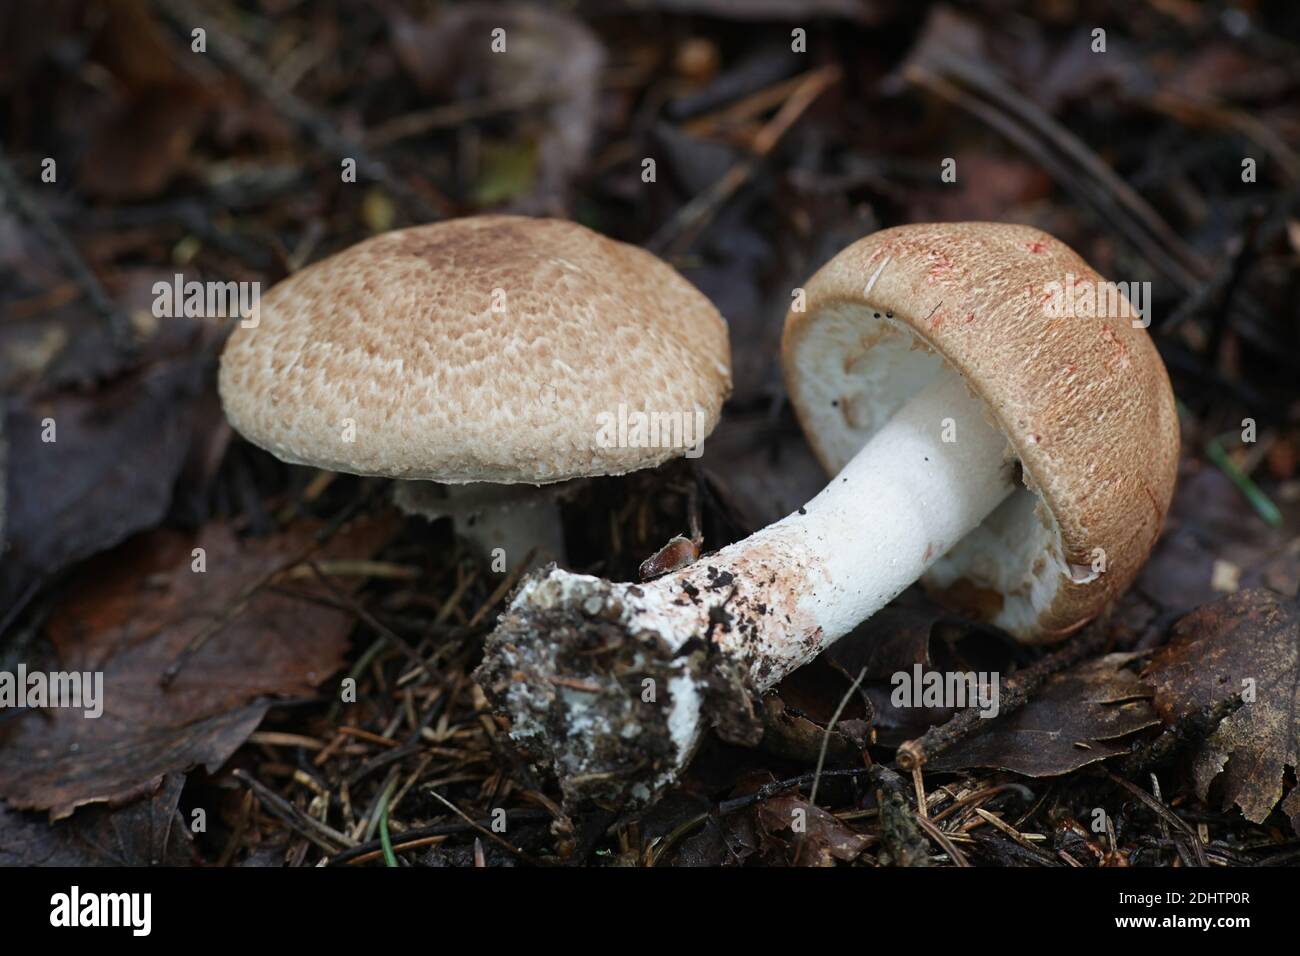 Agaricus langei, known as Scaly Wood Mushroom, wild mushrooms from Finland Stock Photo